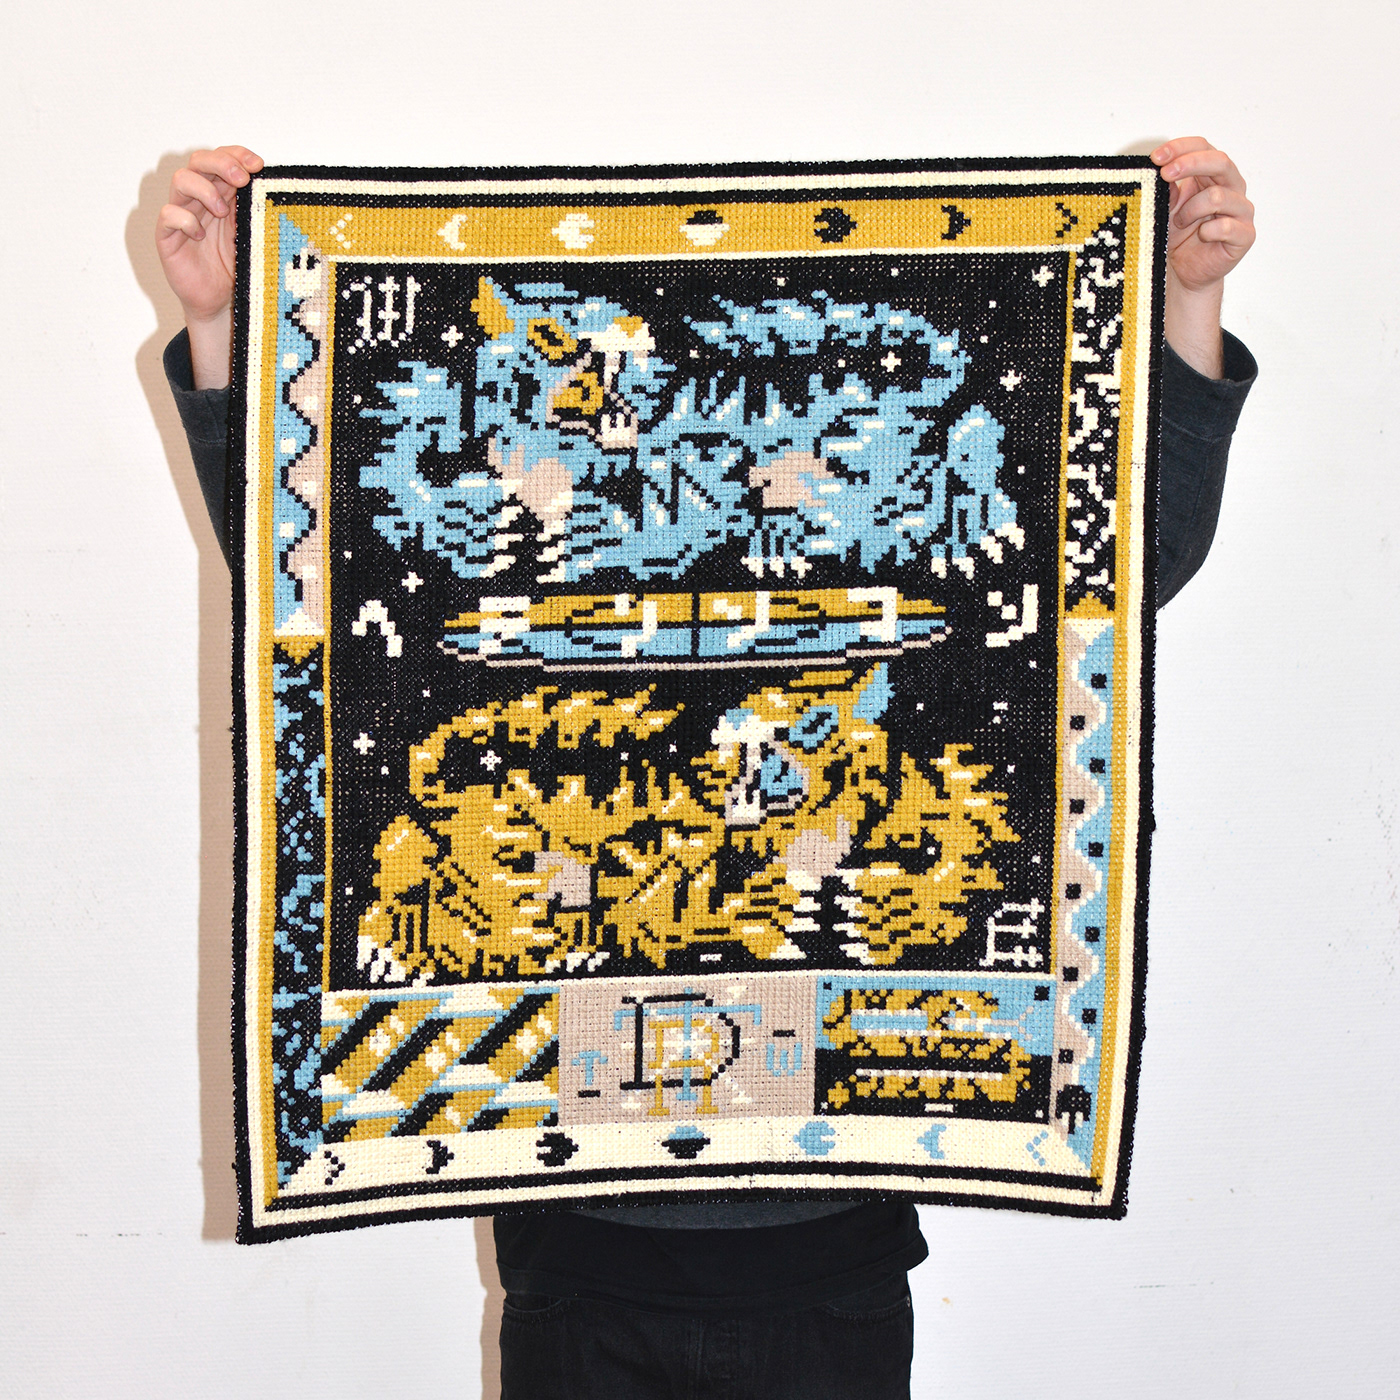 dxtr pictoplasma Exhibition  tapestry Rug canvas acrylics berlin characterdesign wool